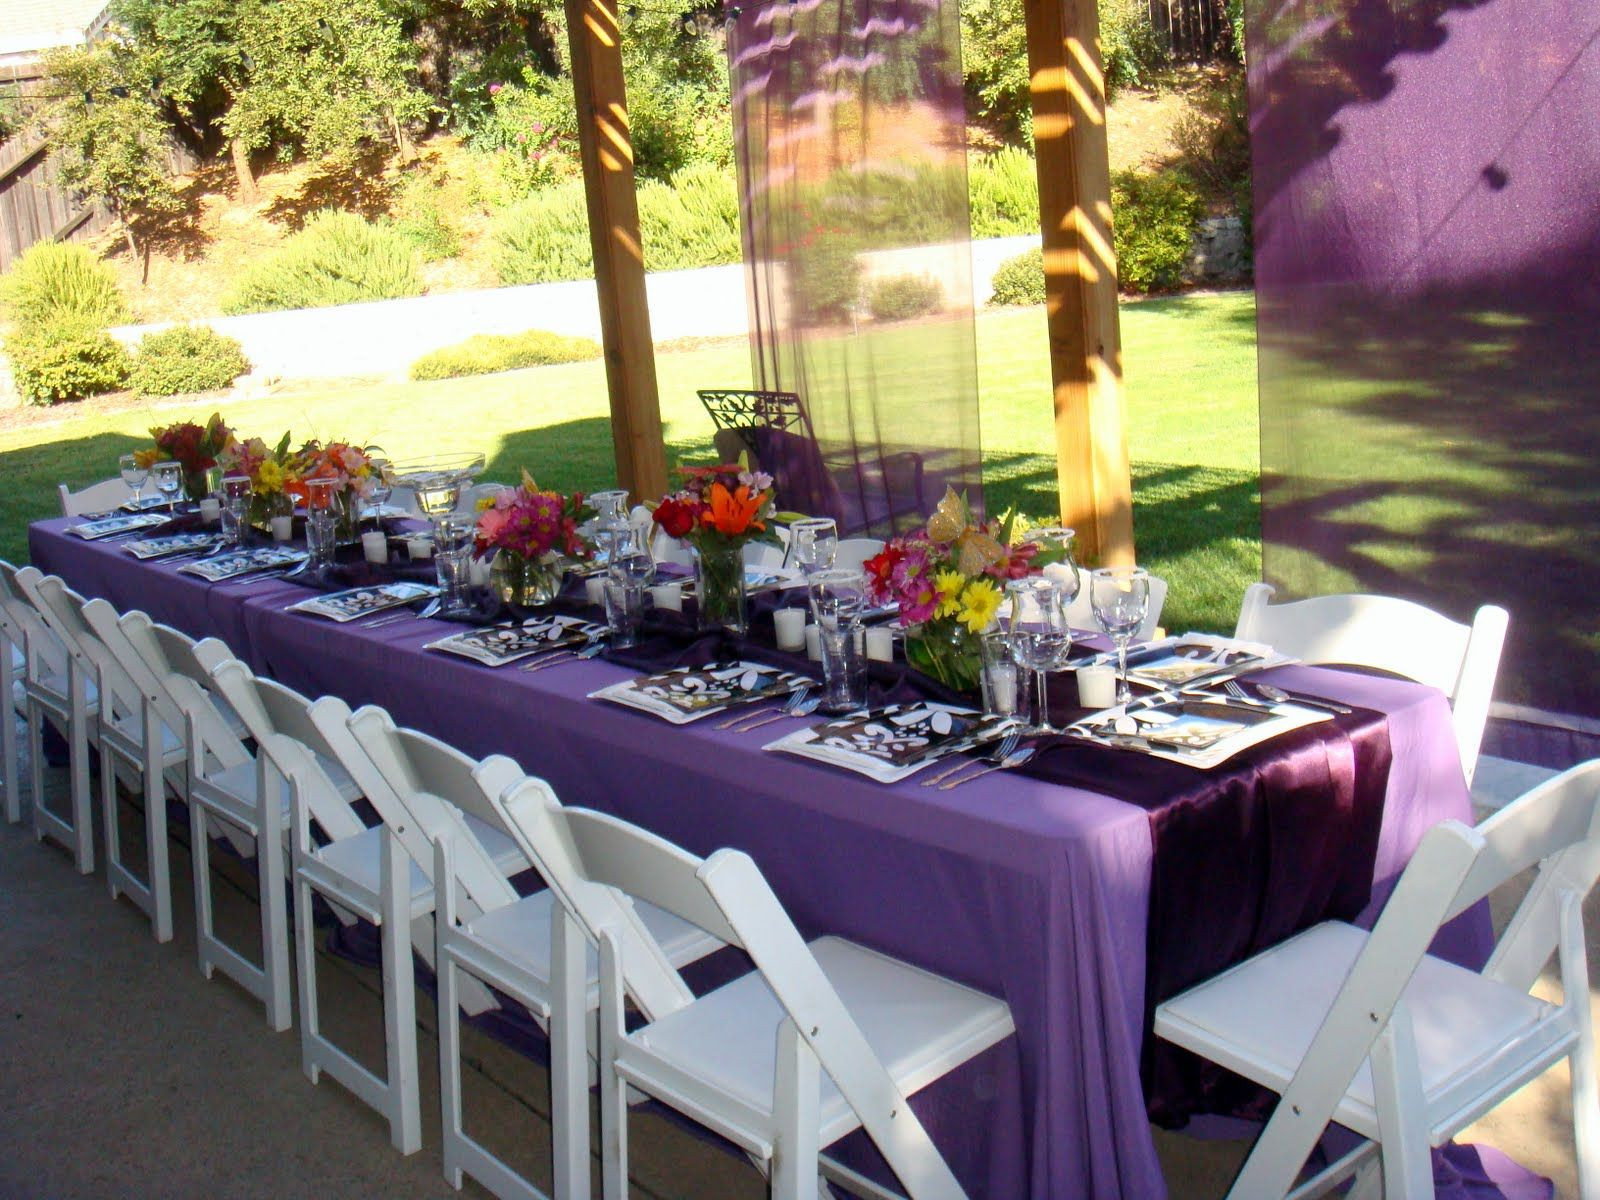 Graduation Backyard Party Ideas
 tablescapes for outdoor graduation party